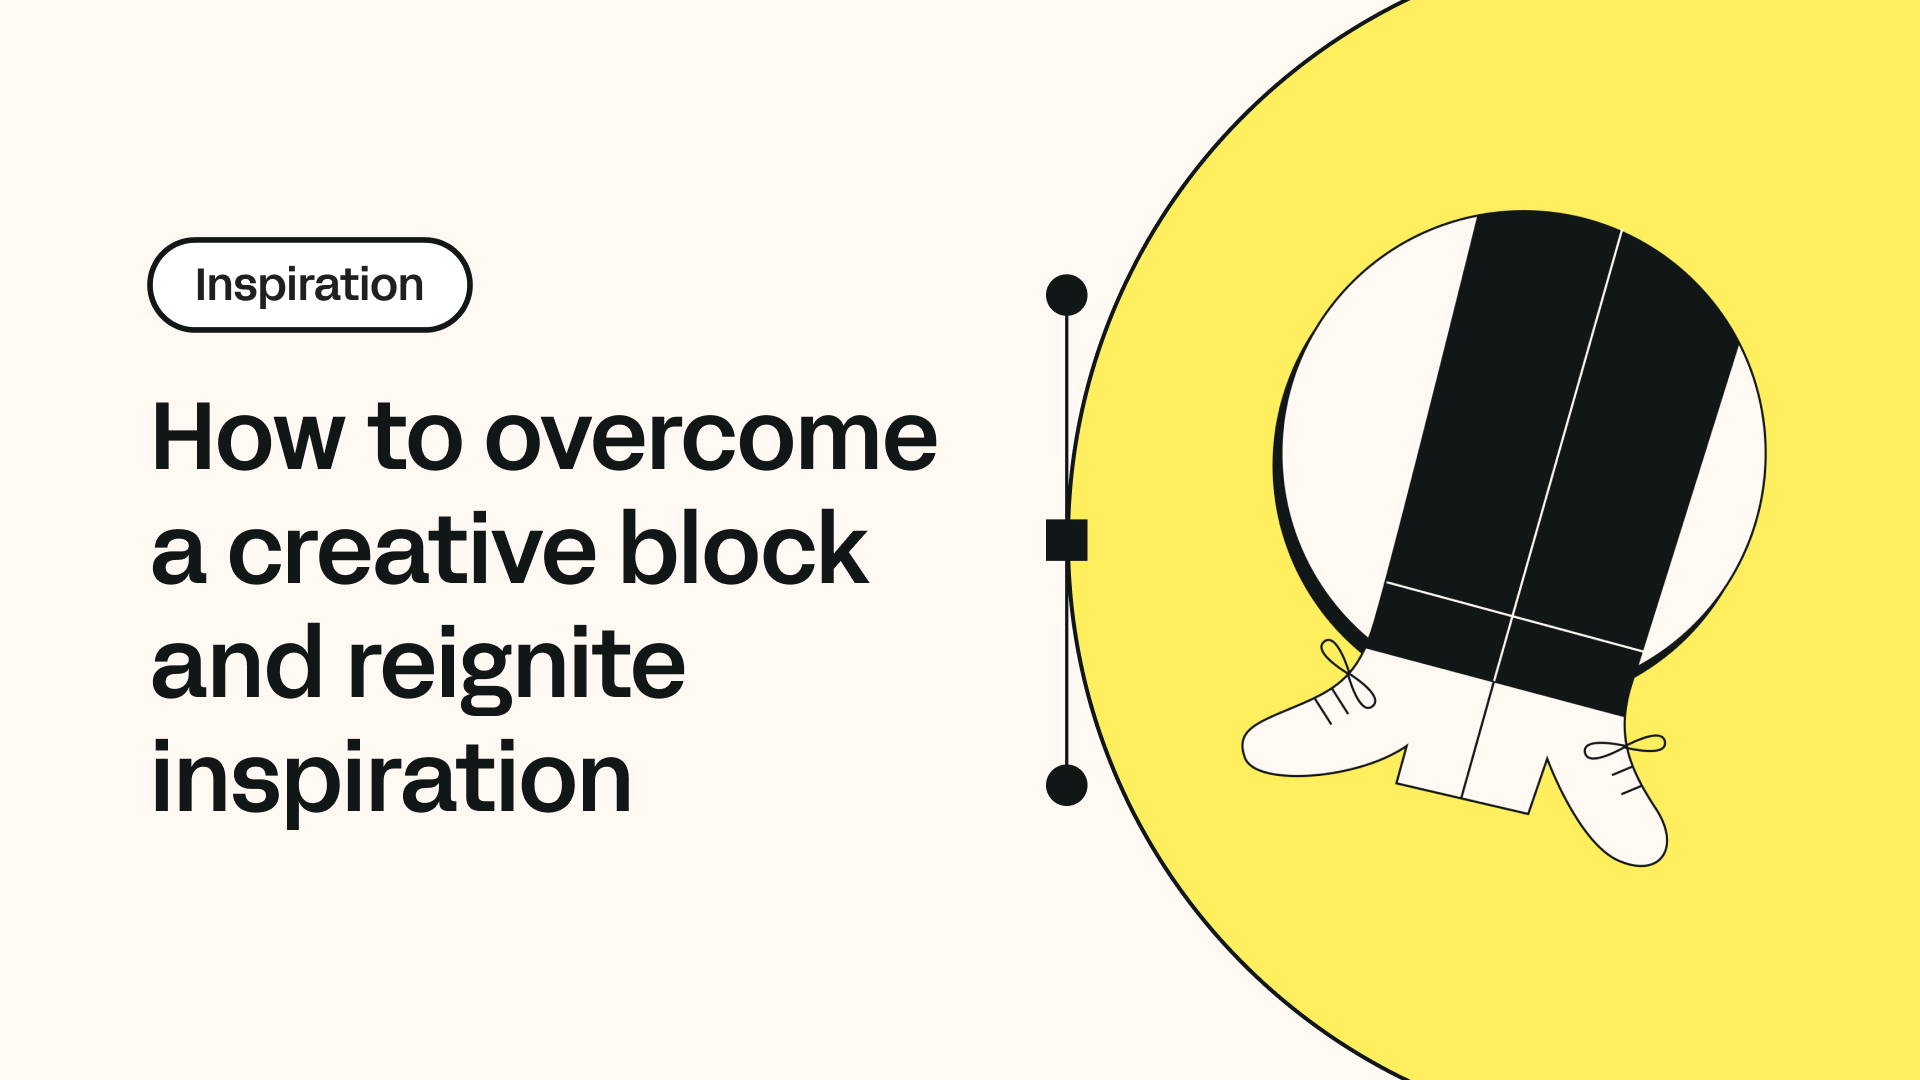 How to overcome a creative block and reignite inspiration | Linearity